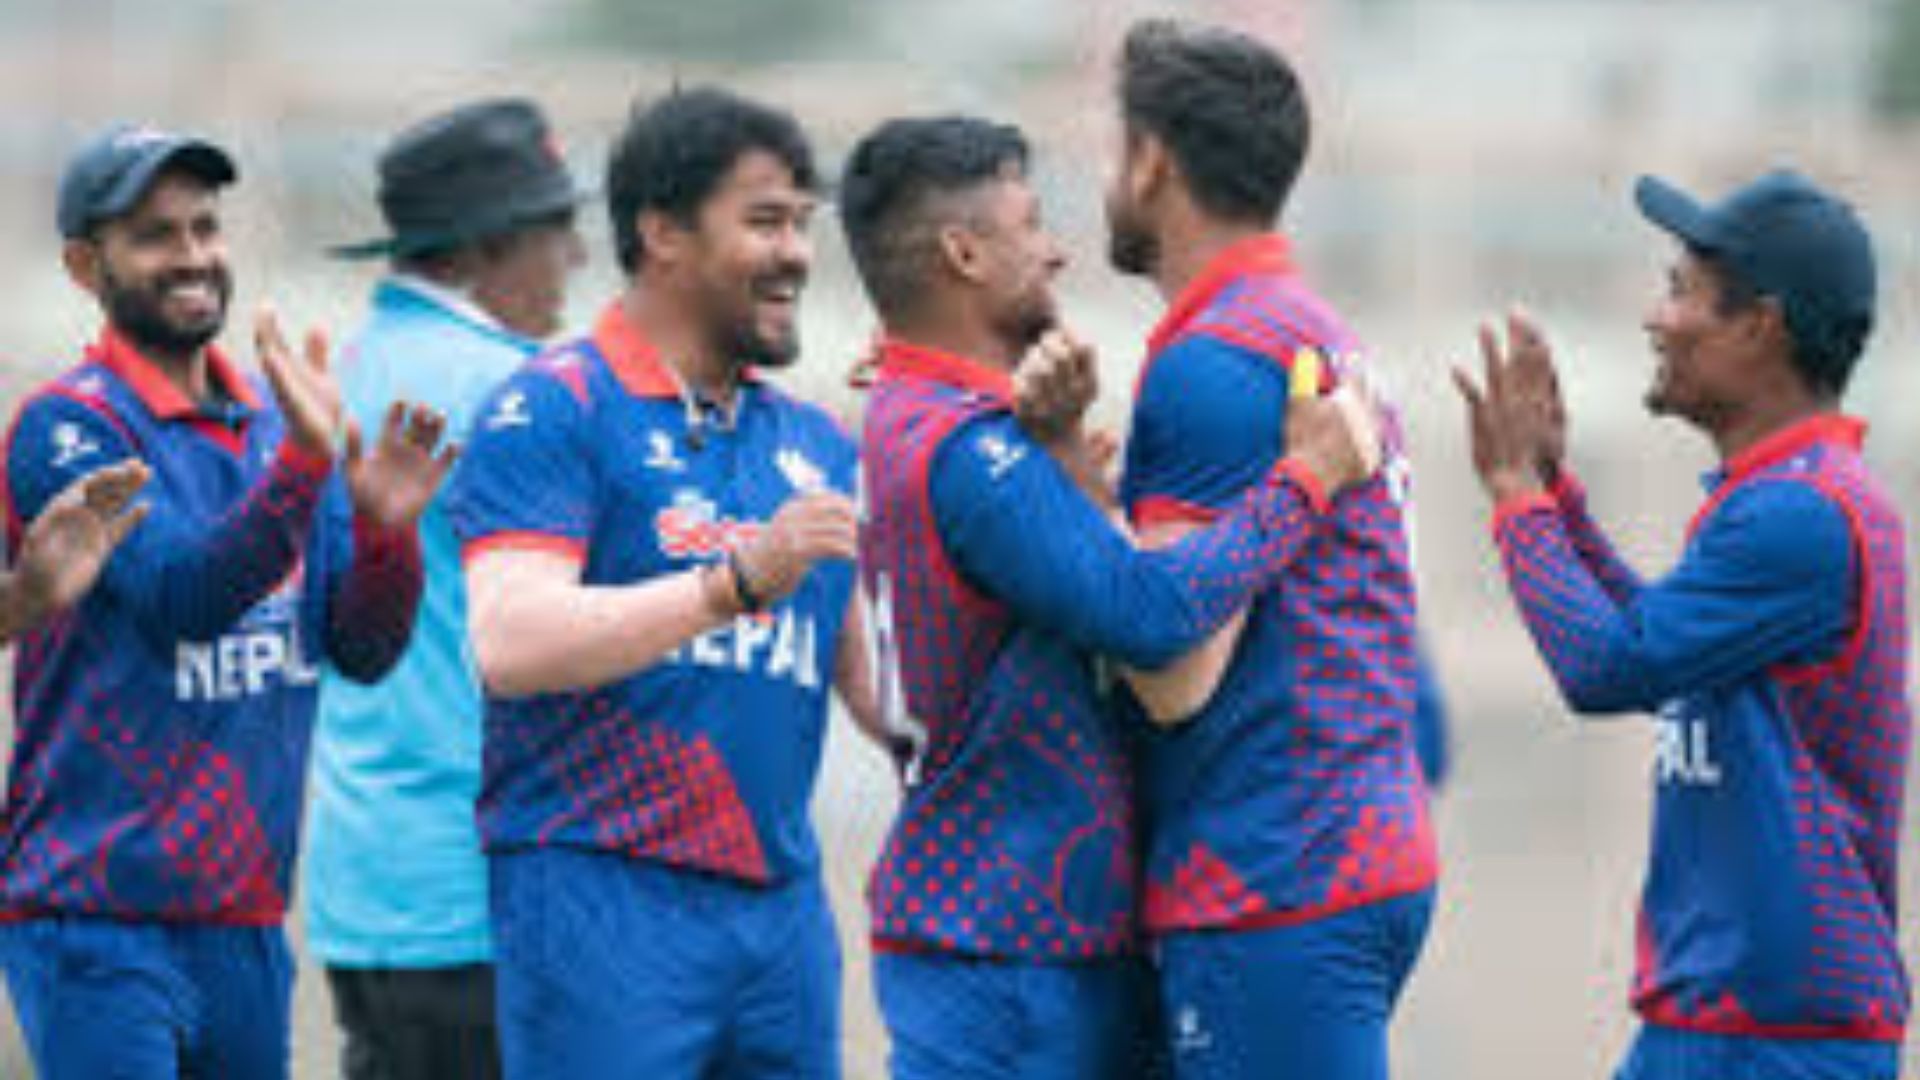 Nepal strikes first, claiming two wickets as PNG scores 57 runs in powerplay